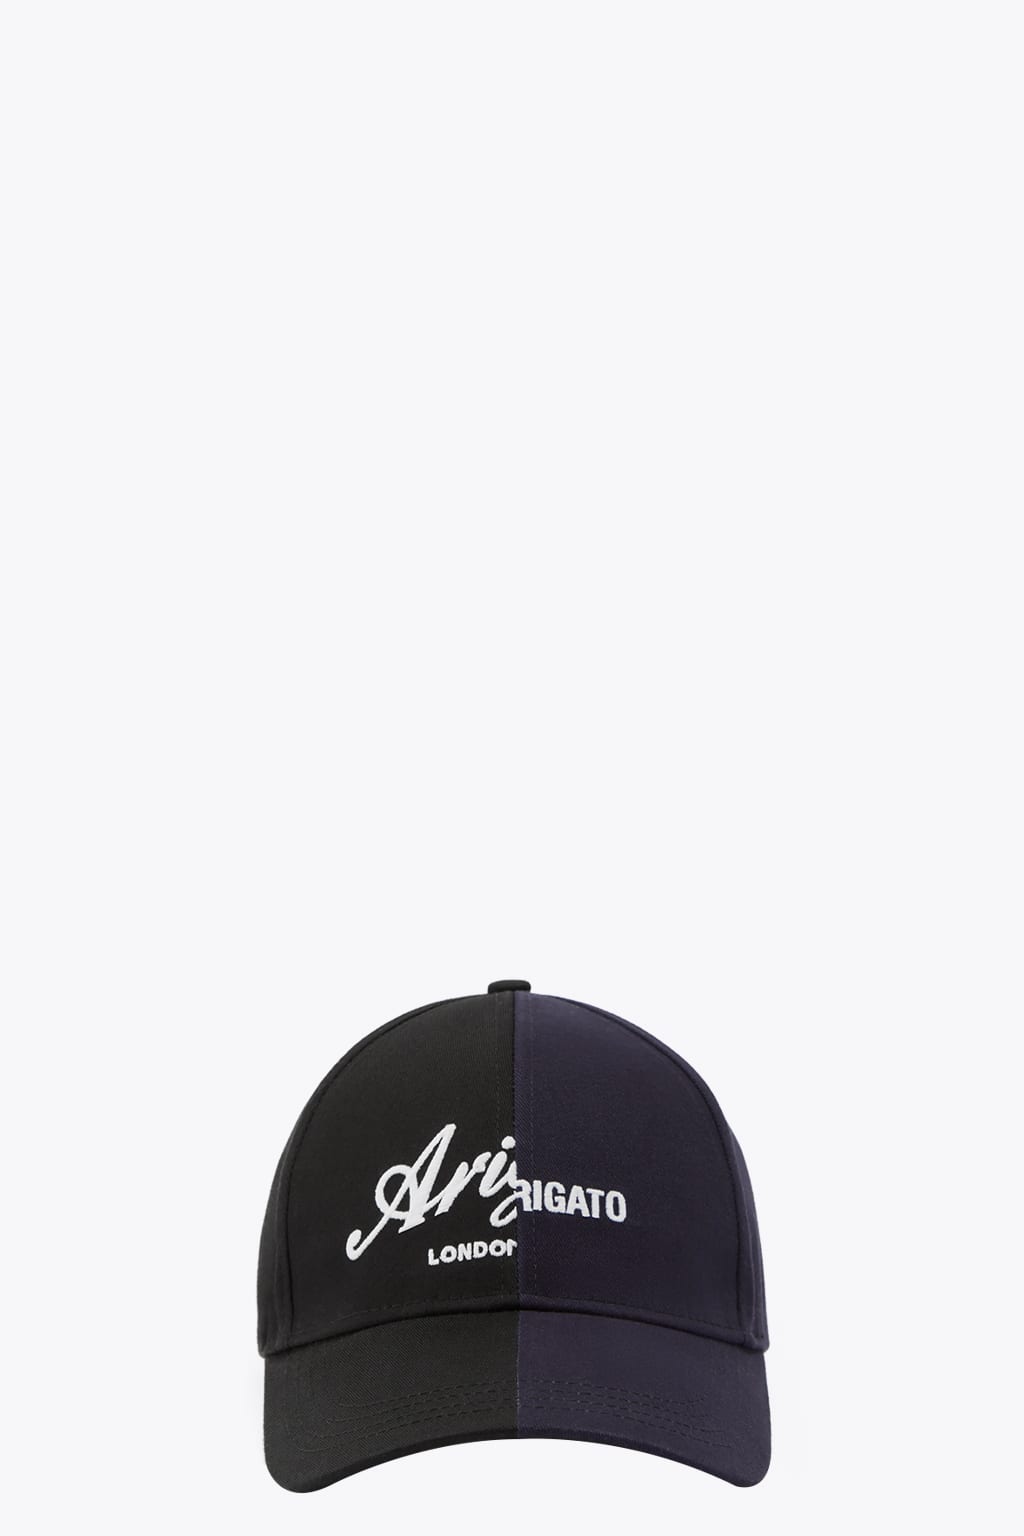 Deconstructed Cap Black and blue cap with logo embroidery - Deconstrucetd cap